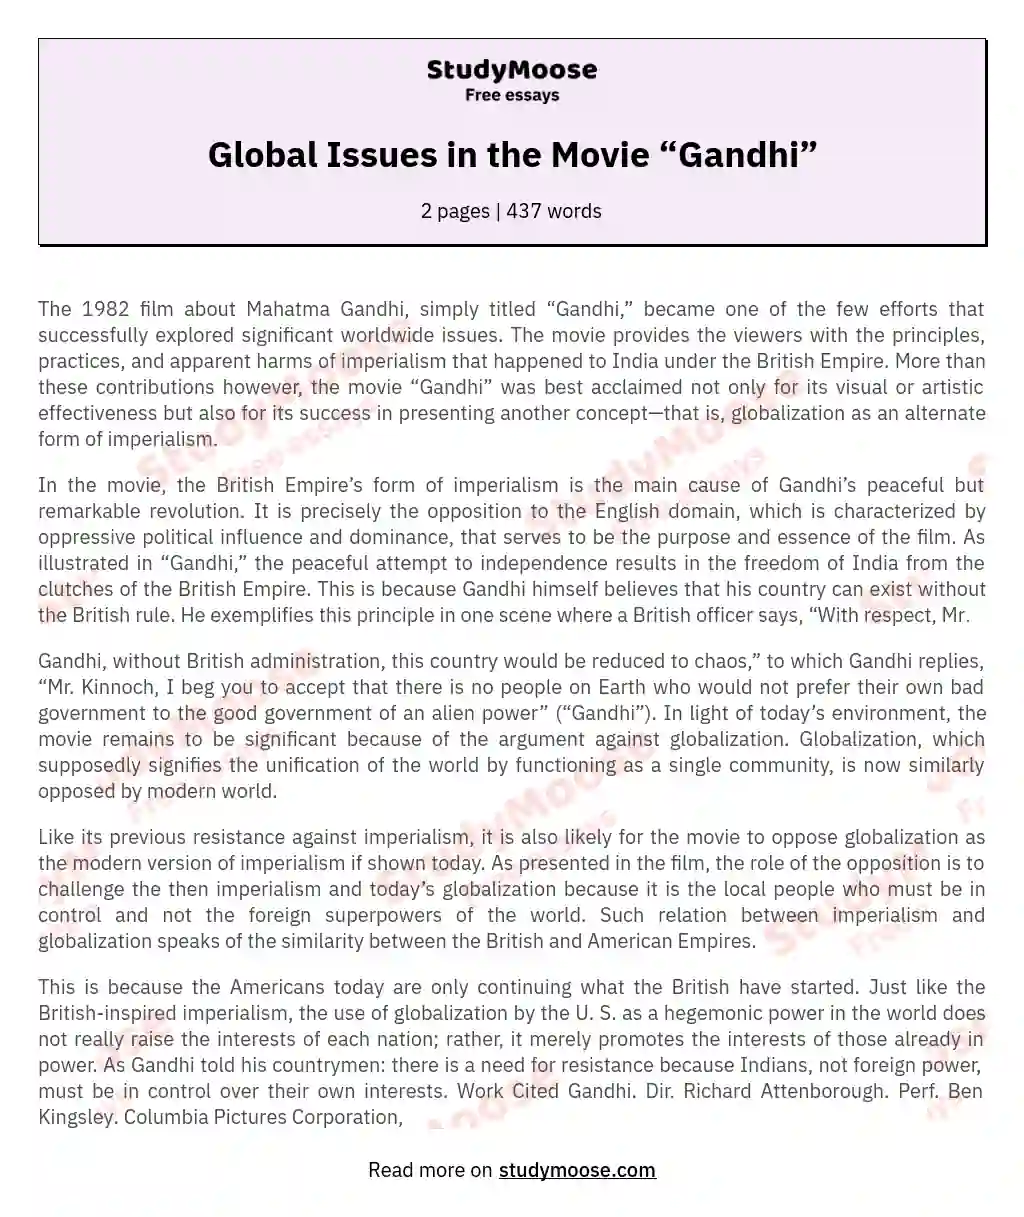 Global Issues in the Movie “Gandhi” essay